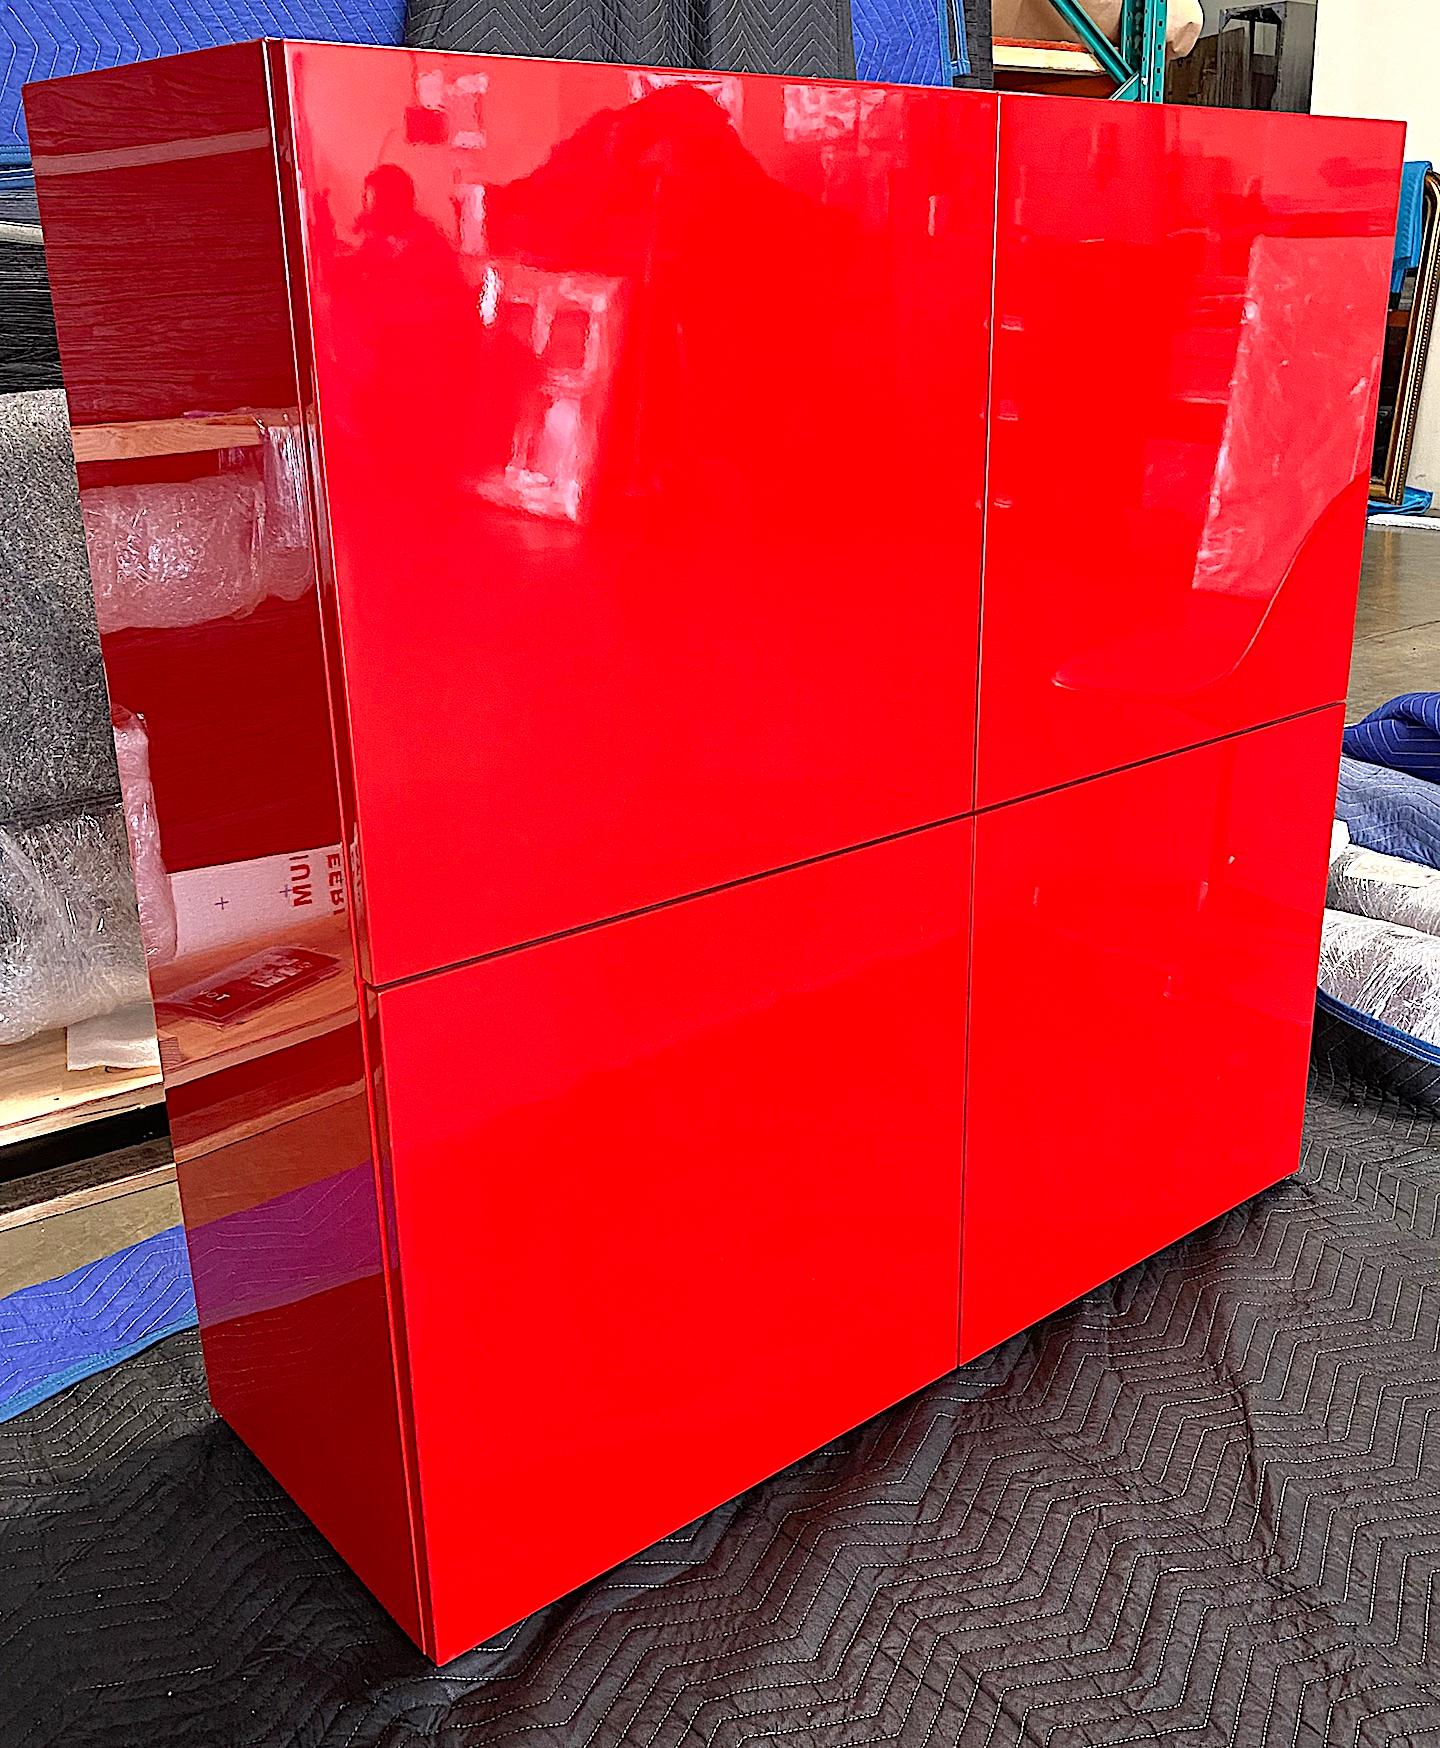 Italian Early 21st Century Red Lacquer Bar/Cabinet, Piero Lissoni